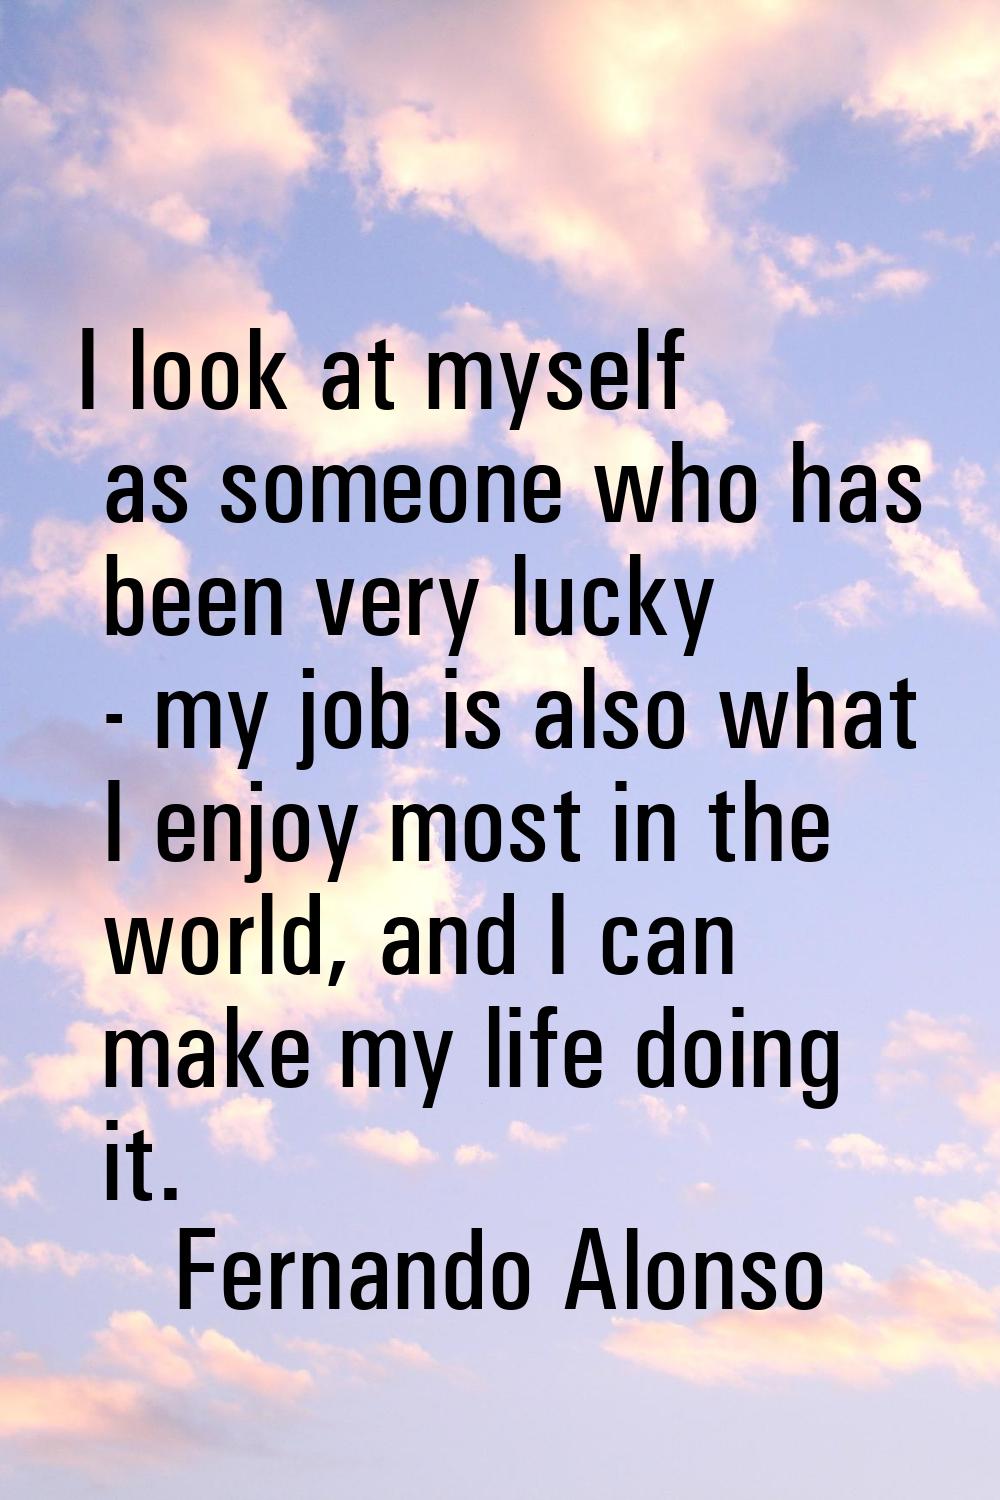 I look at myself as someone who has been very lucky - my job is also what I enjoy most in the world